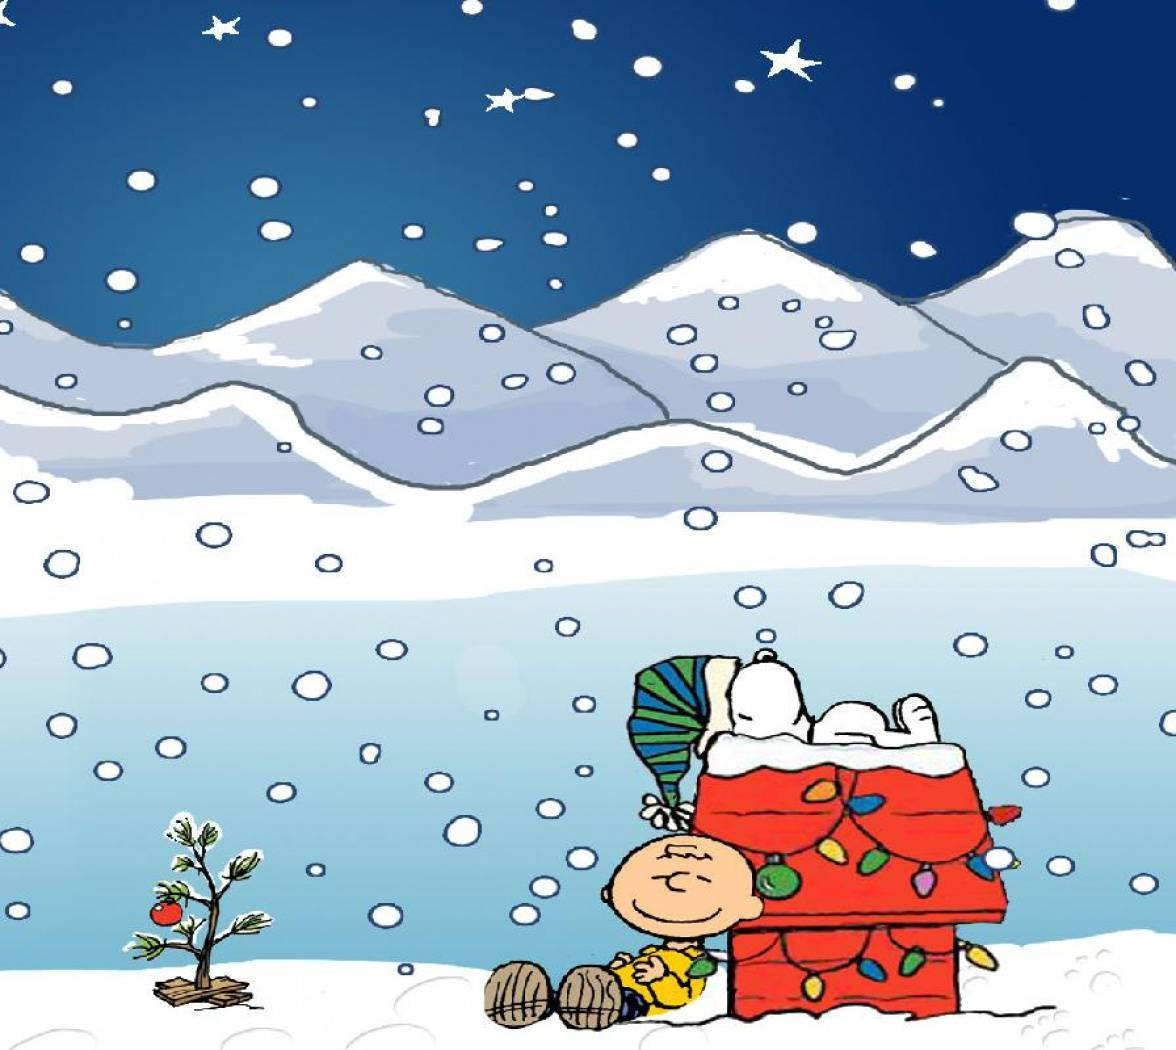 Download Snoopy Christmas Iphone 1176 X 1050 Wallpaper | Wallpapers.com